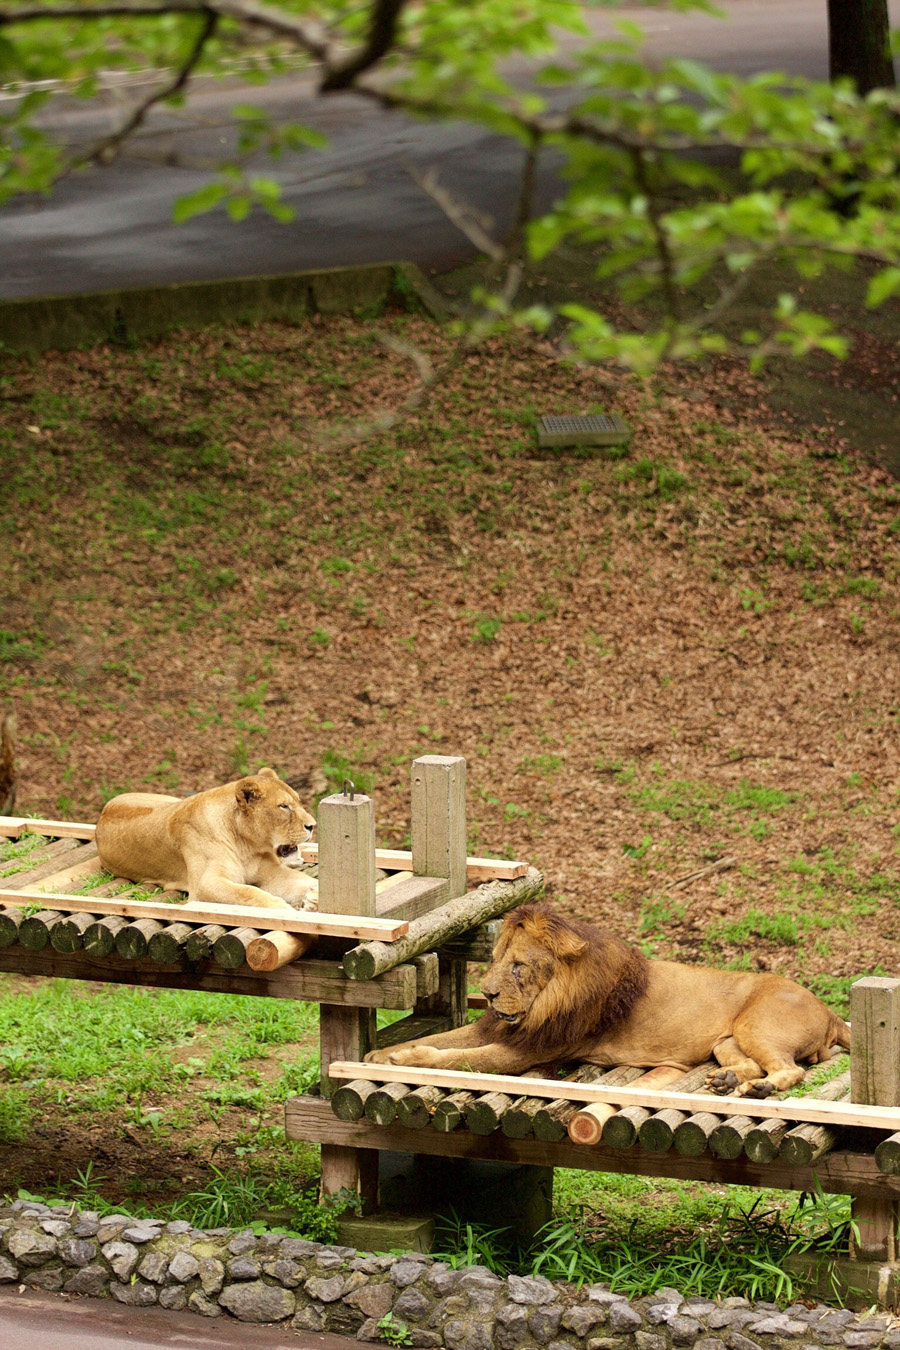 Lions relaxing in the shade at Tama Zoo, Hino, Tokyo